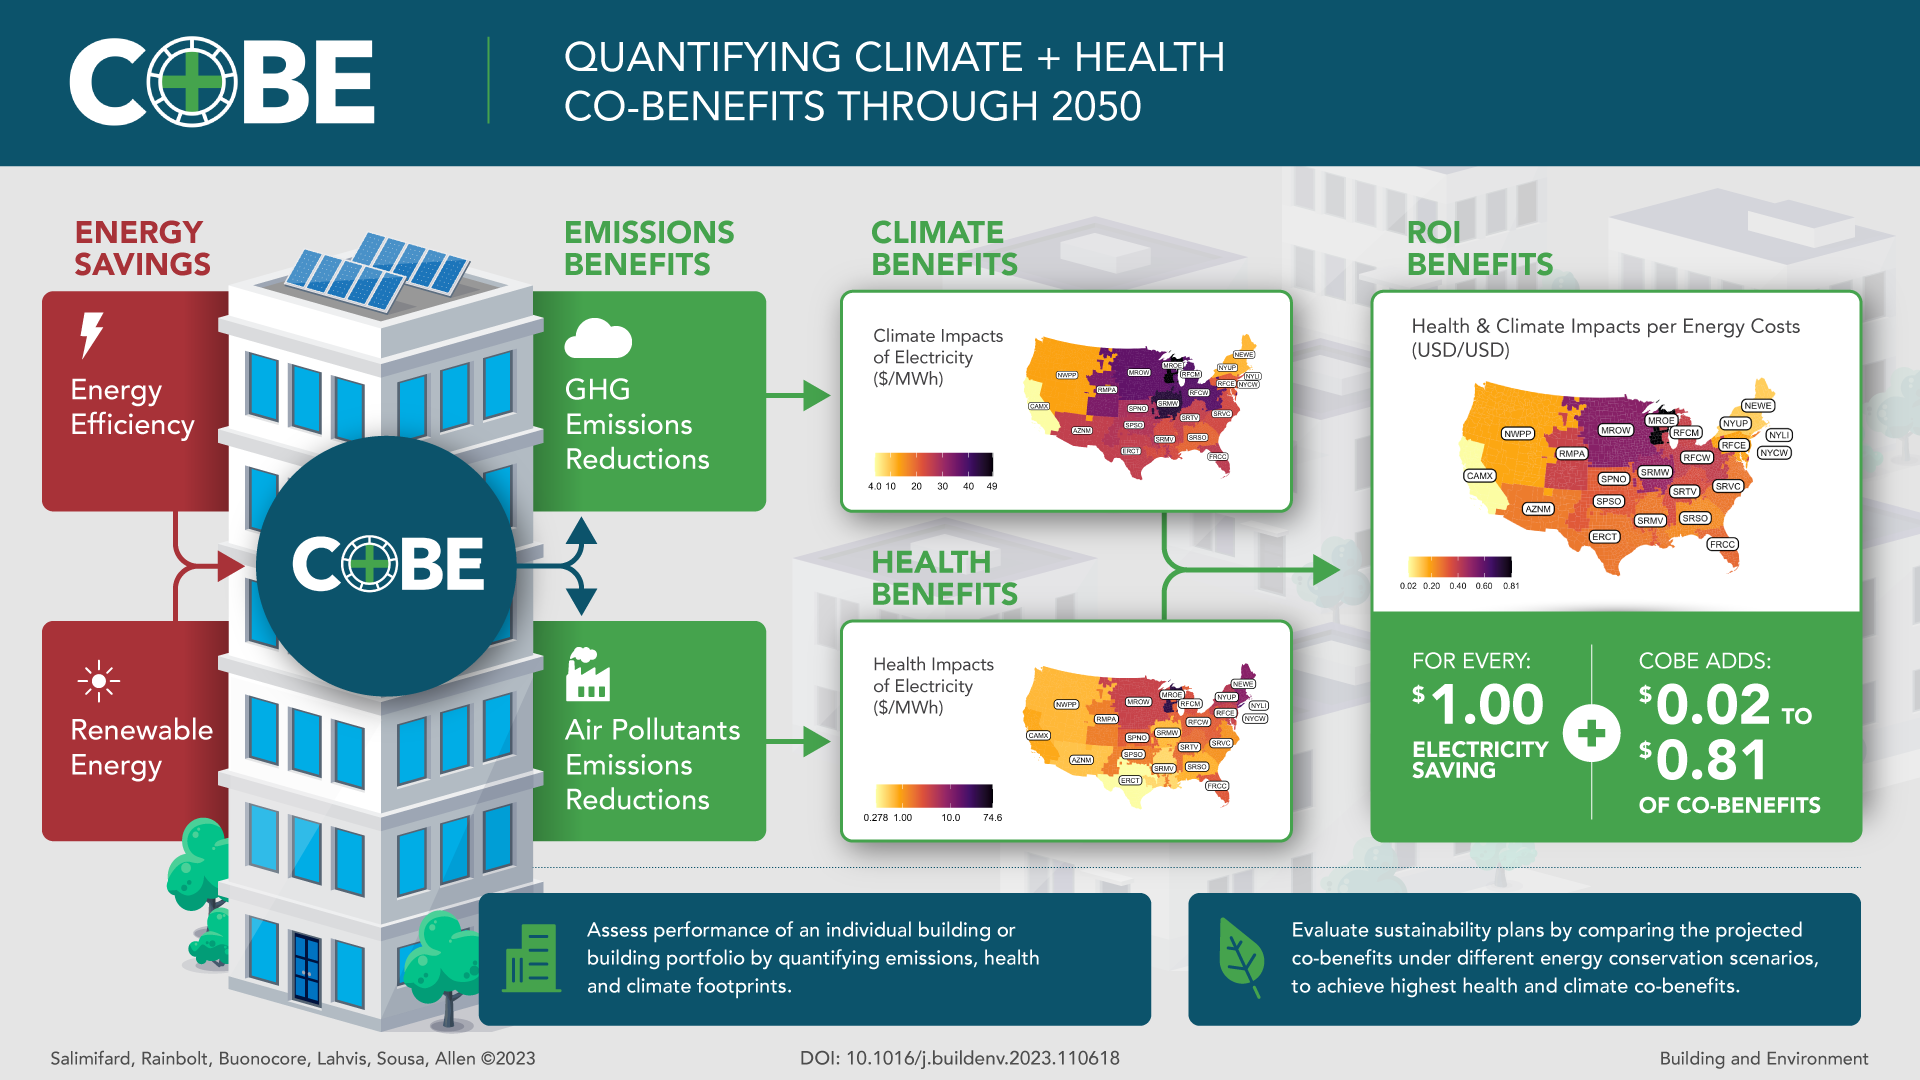 An infographic showing how CoBE Projection can aid stakeholders and decision-makers in (1) assessing current individual building or building portfolio performance by quantifying emissions, health, and climate footprint; and (2) evaluating their sustainability plans by comparing the projected co-benefits under different energy conservation scenarios, to achieve highest health and climate co-benefits.